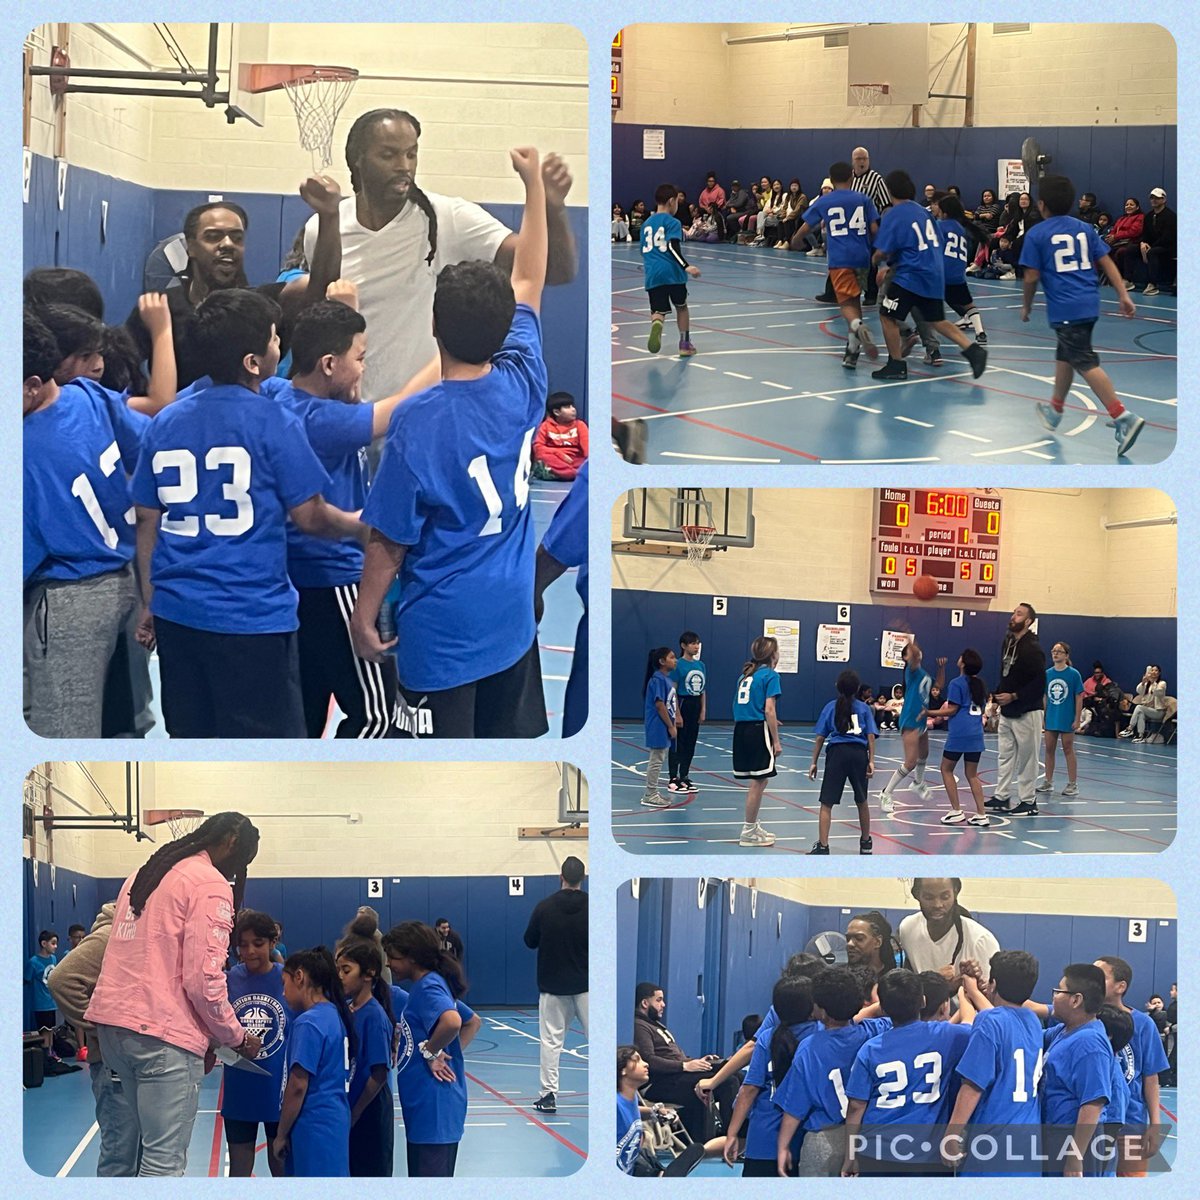 Such a great afternoon cheering on our boys & girls basketball team @PS16School @PS10FortHill We had a great game against @50PublicSchool 🏀 🐾🐘